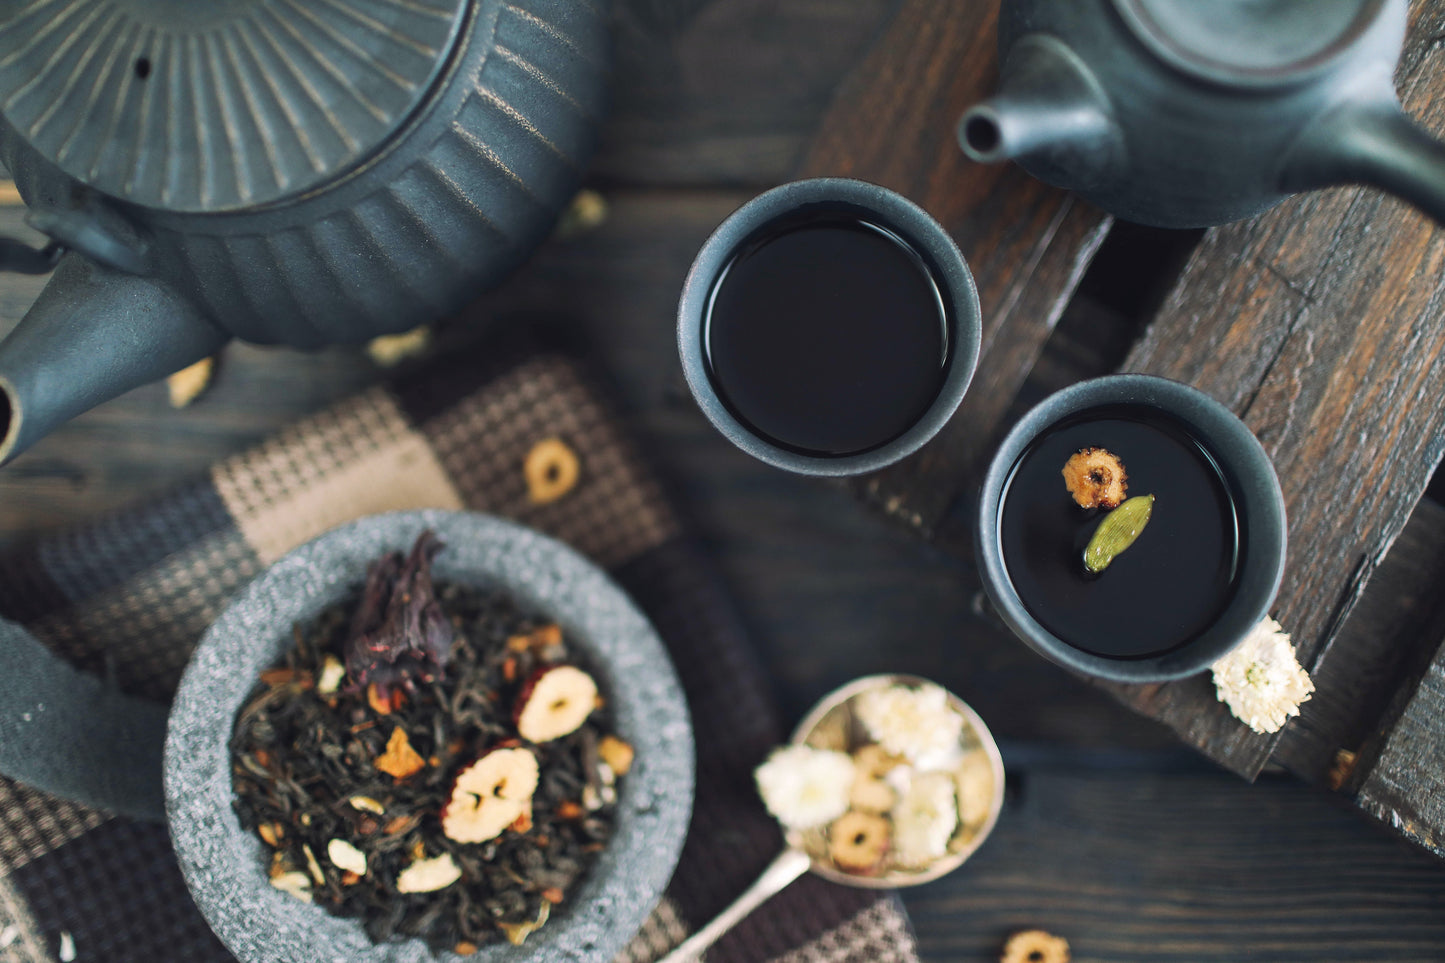 How to brew loose leaf tea in 3 easy steps